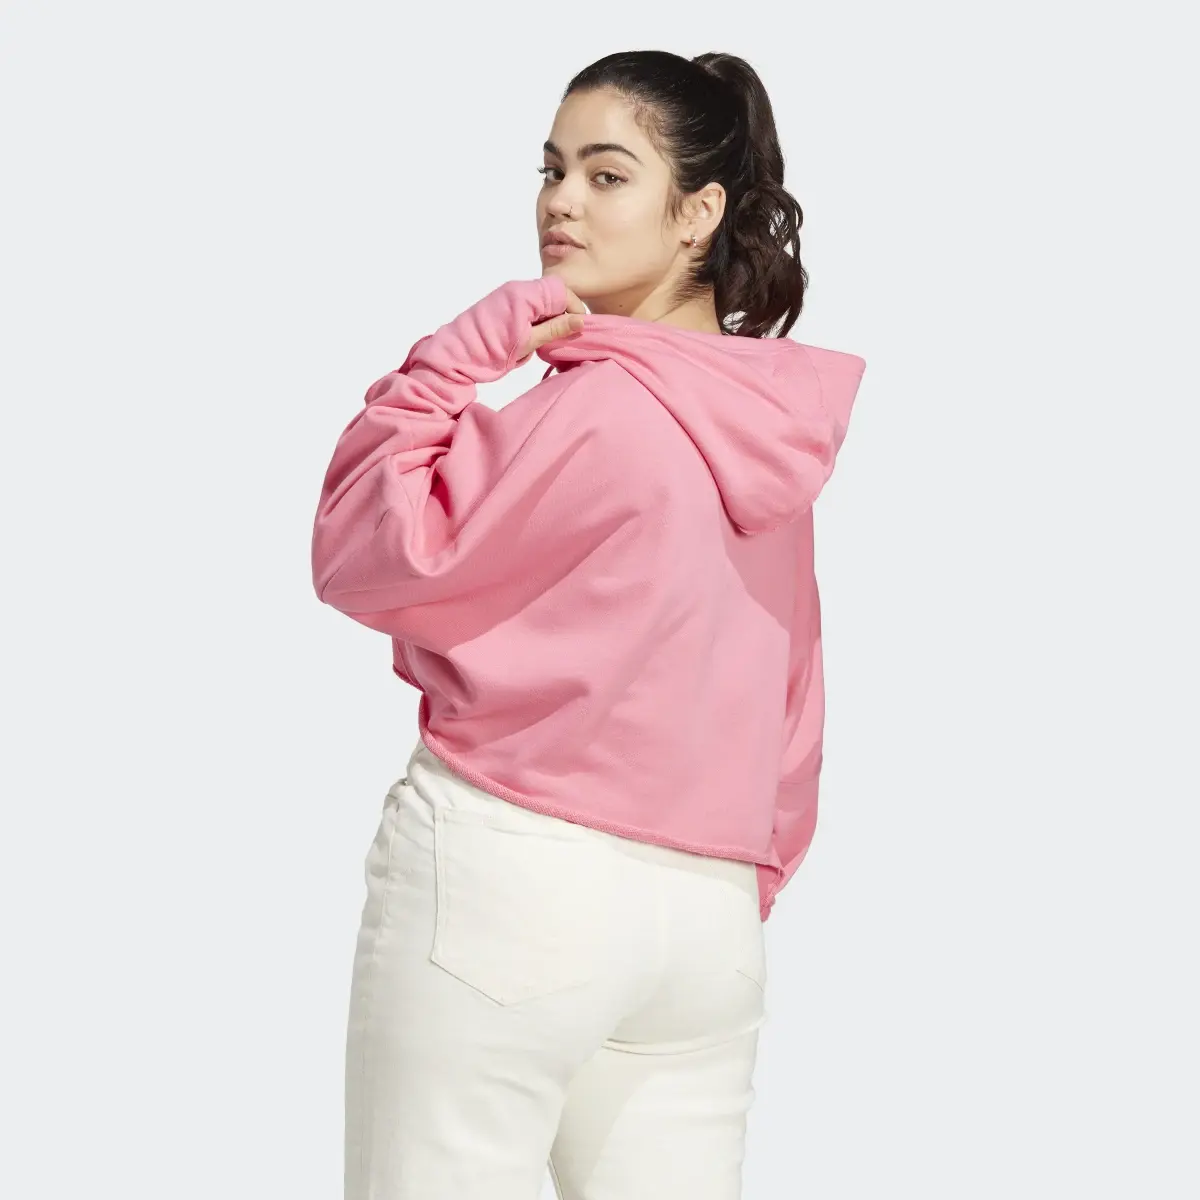 Adidas Collective Power Cropped Hoodie (Plus Size). 3